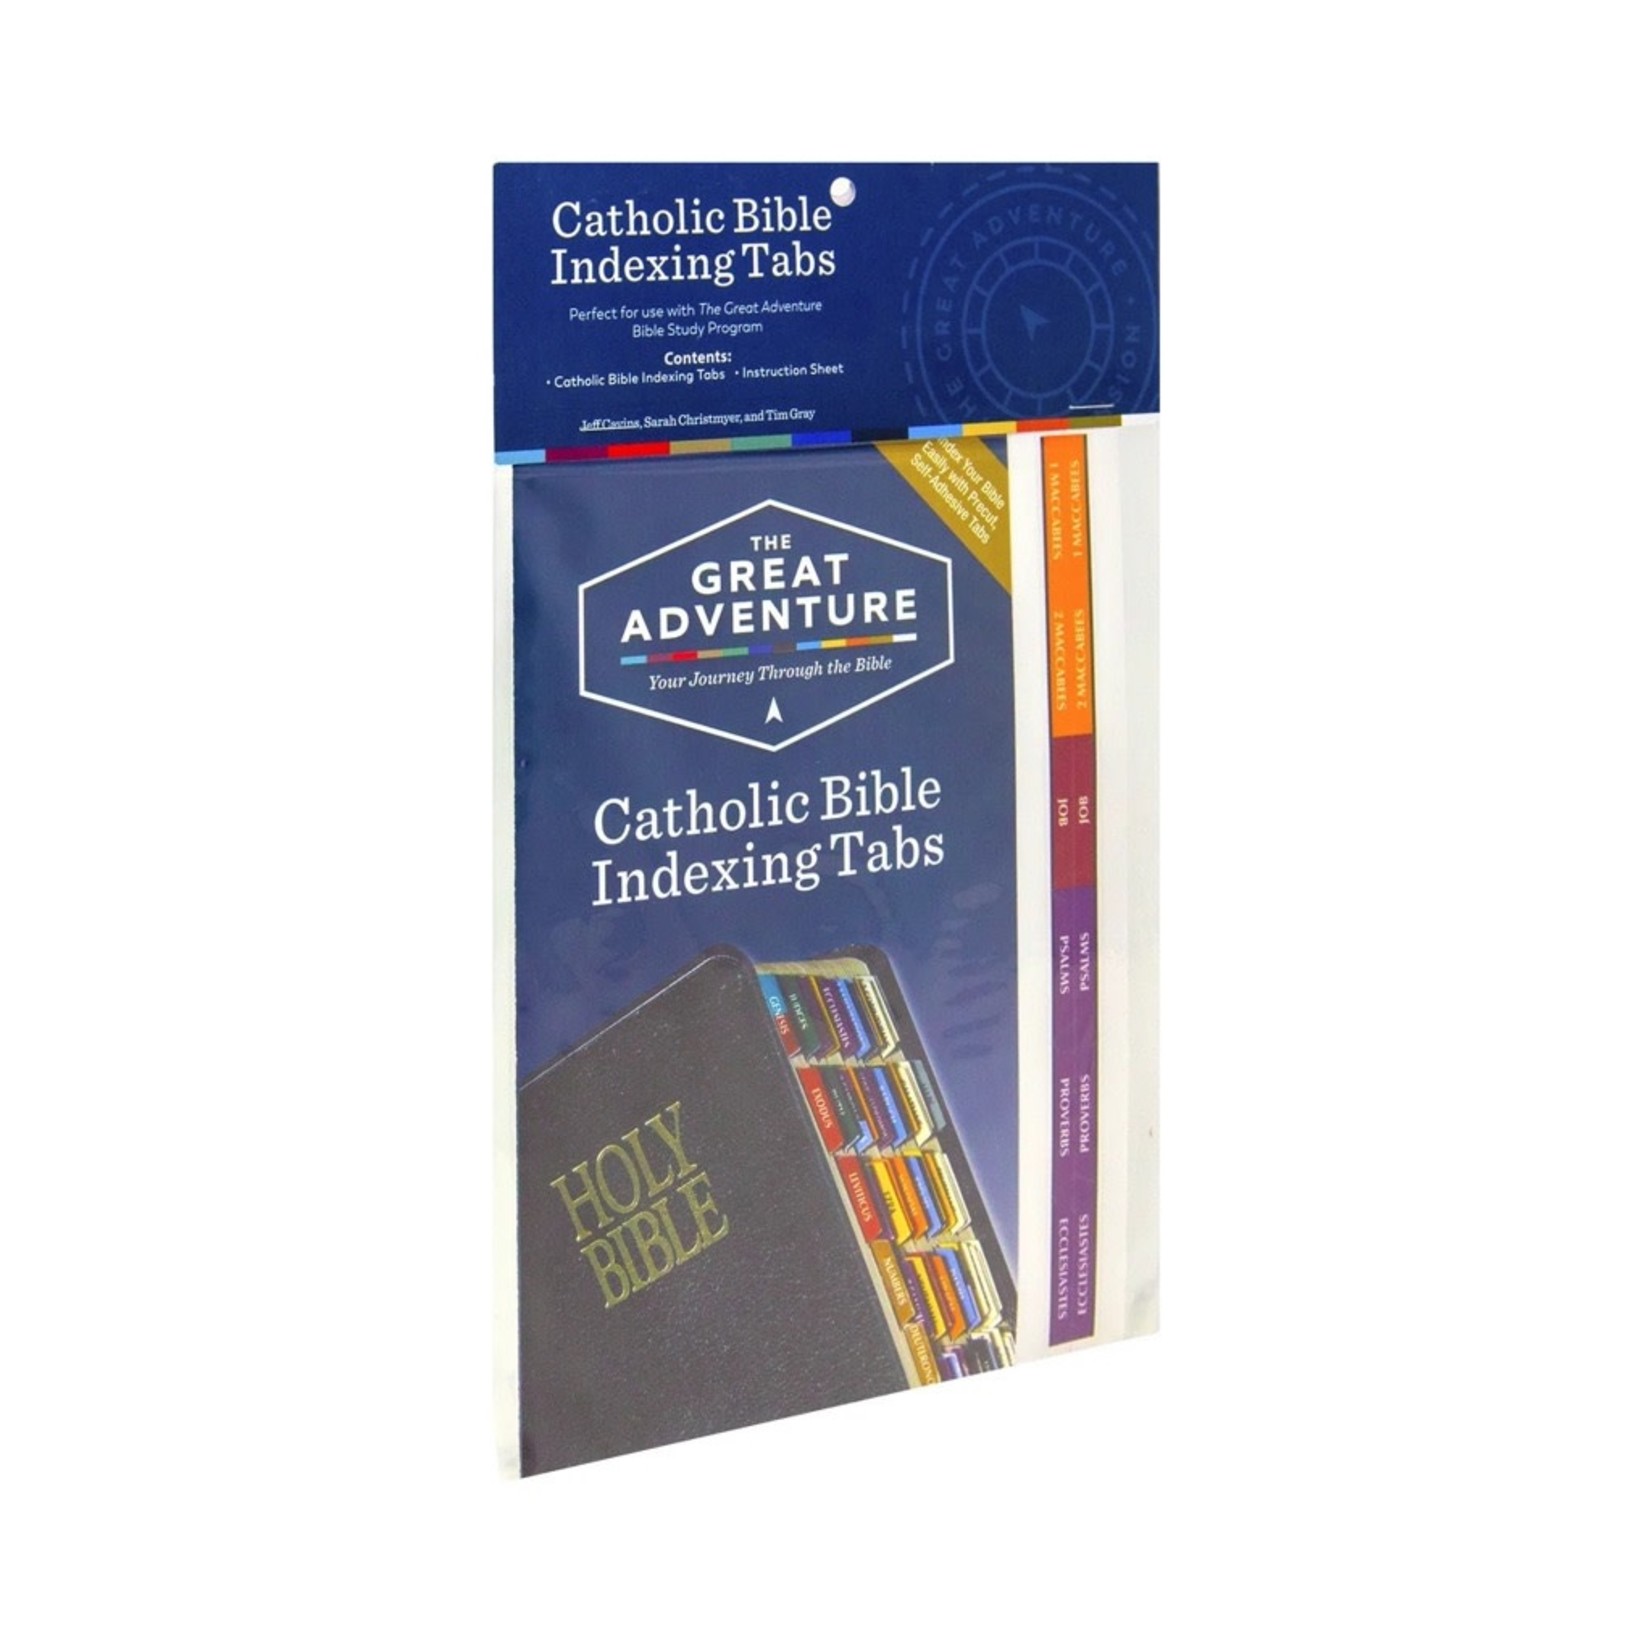 The Great Adventure Bible Indexing Tabs St Pauls Catholic Books And Ts